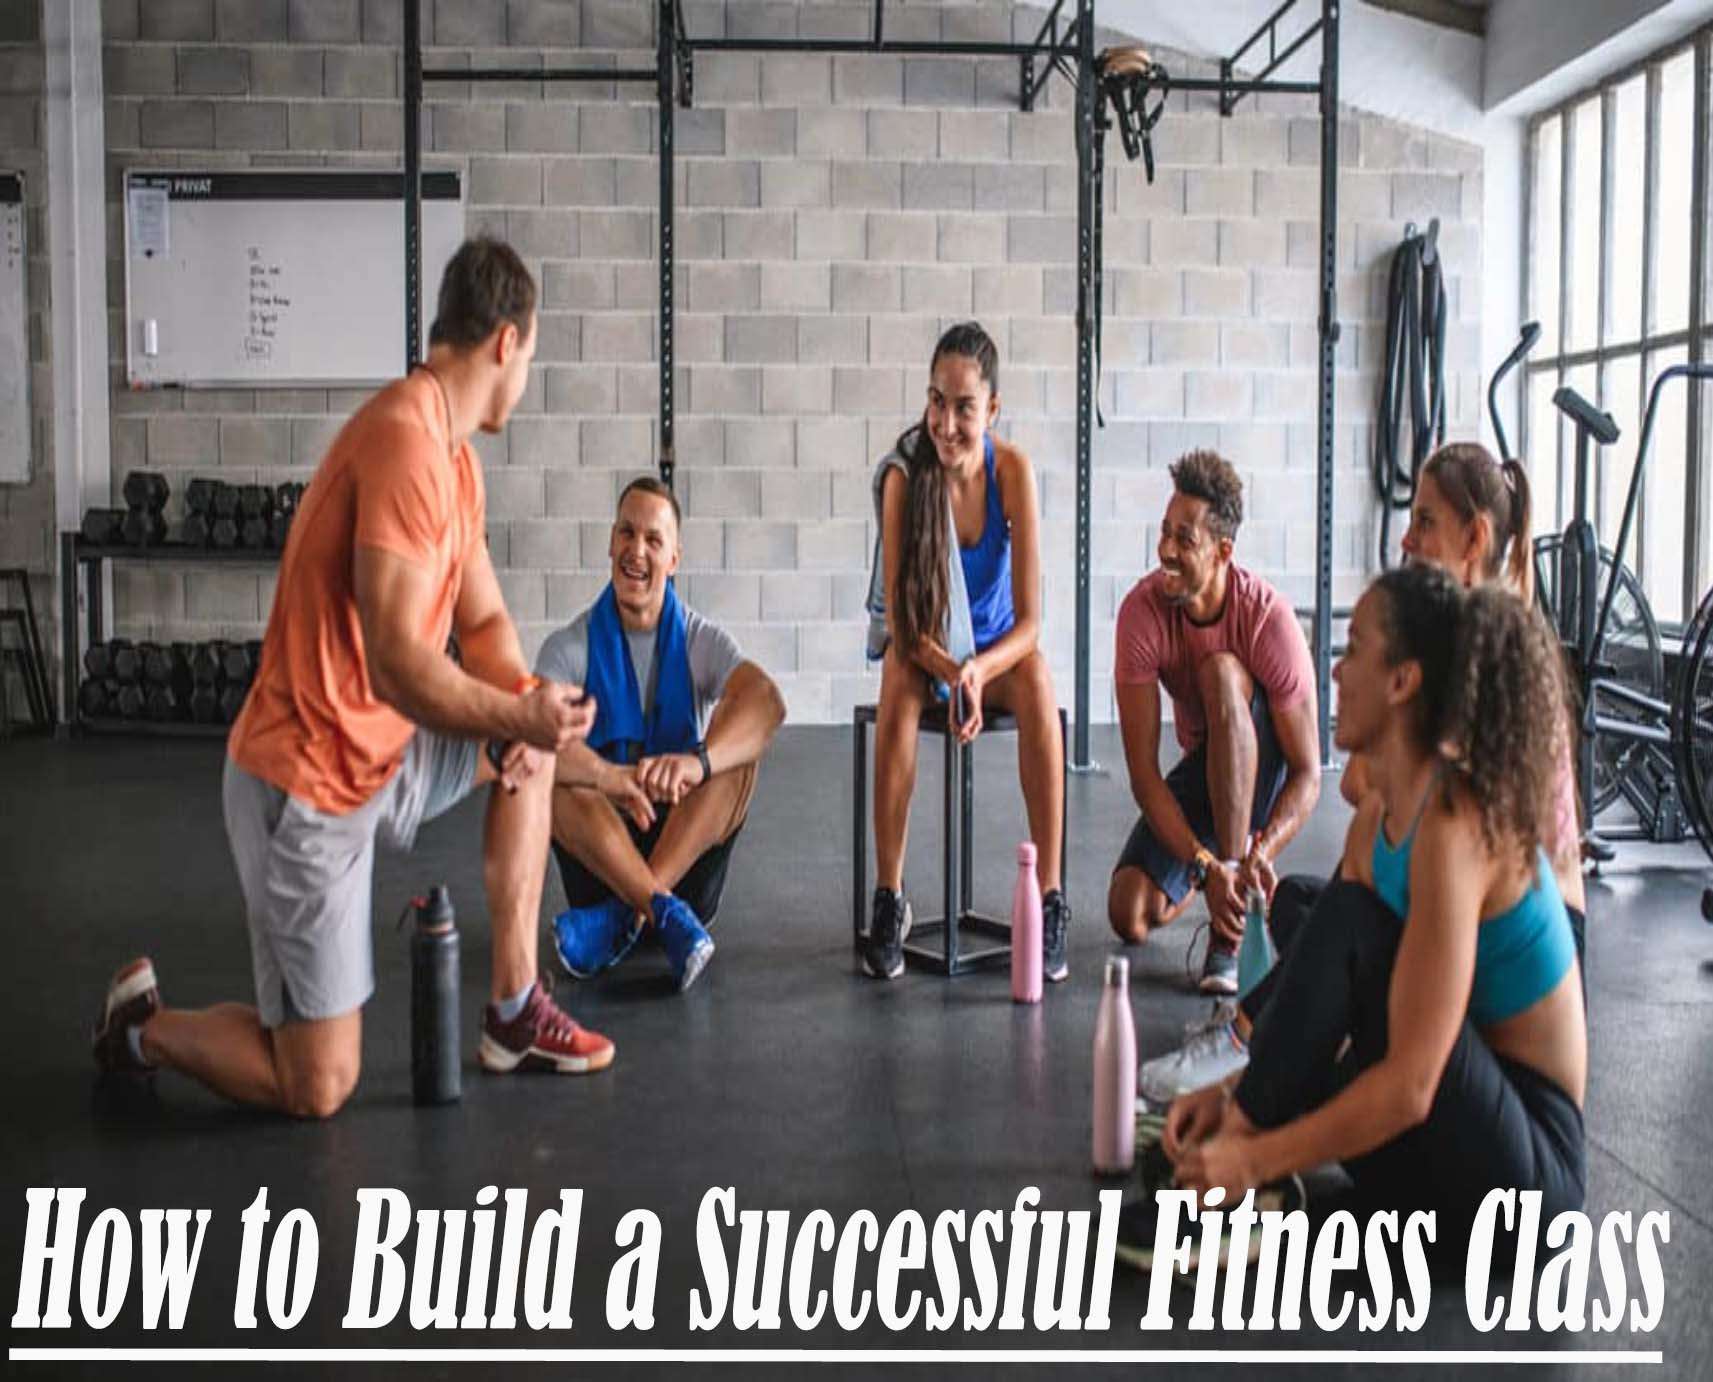 How to Build a Successful Fitness Class